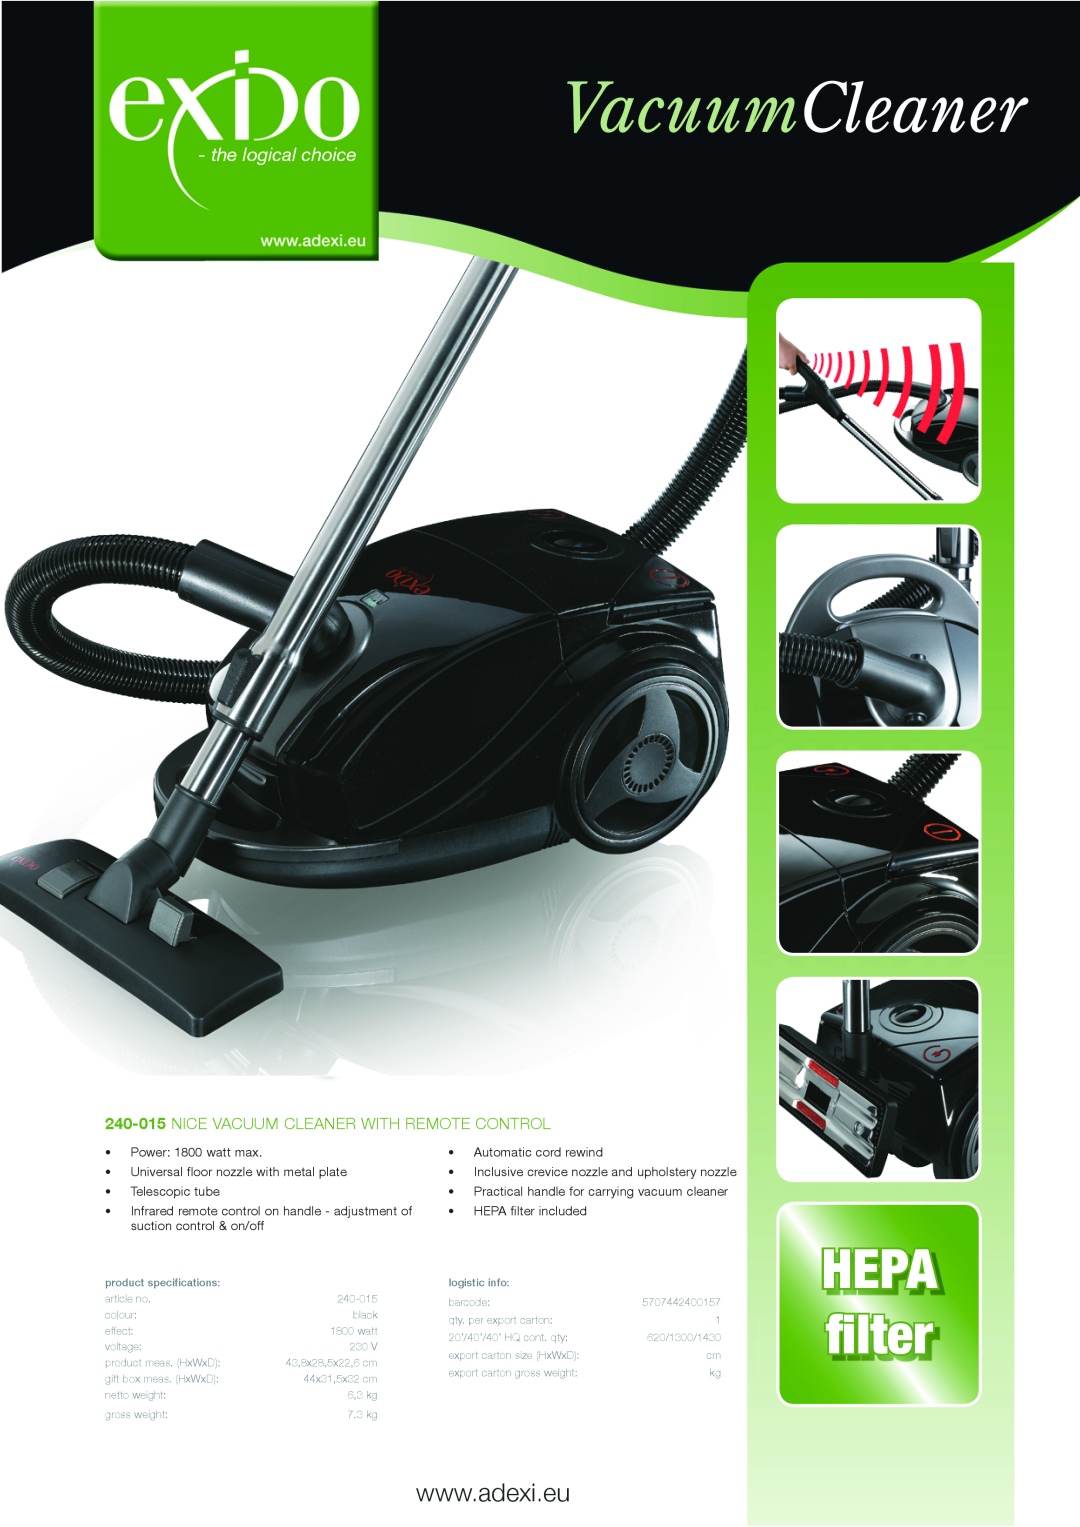 Melissa 240-015 specifications VacuumCleaner, HEPA filter, the logical choice, Nice Vacuum Cleaner With Remote Control 